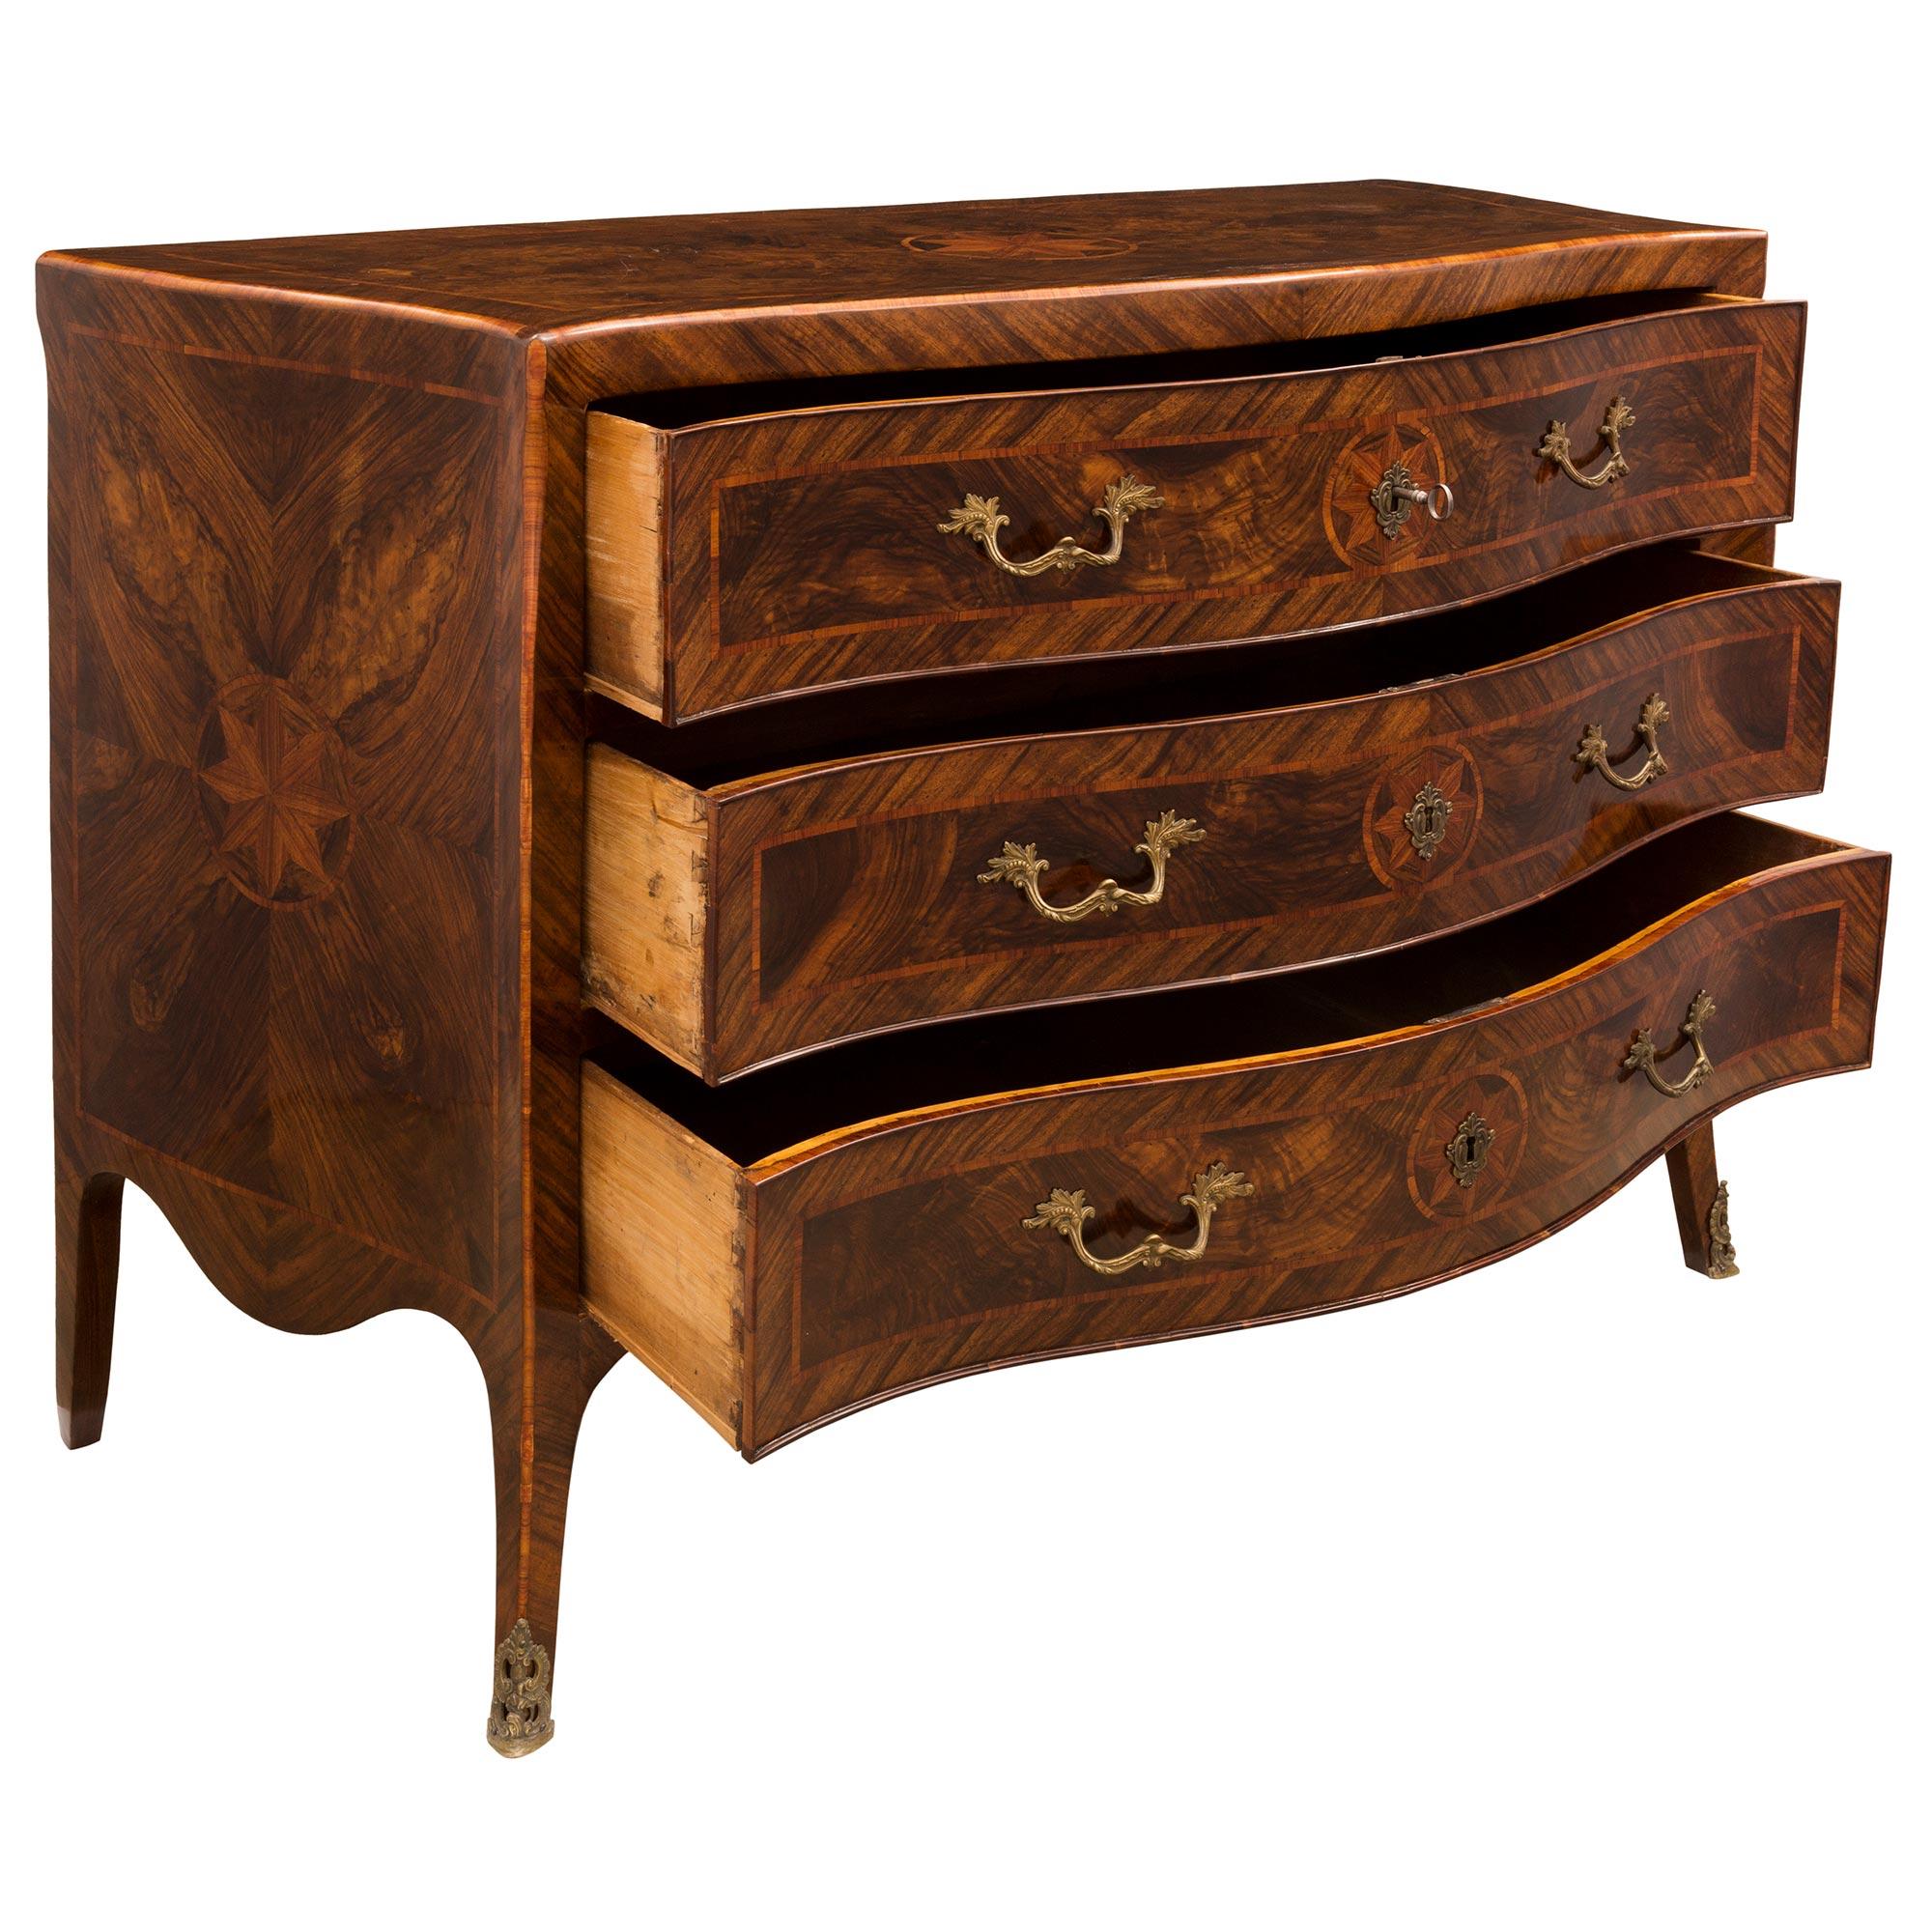 Italian 18th Century Louis XV Period Walnut His and Her Commodes In Good Condition For Sale In West Palm Beach, FL